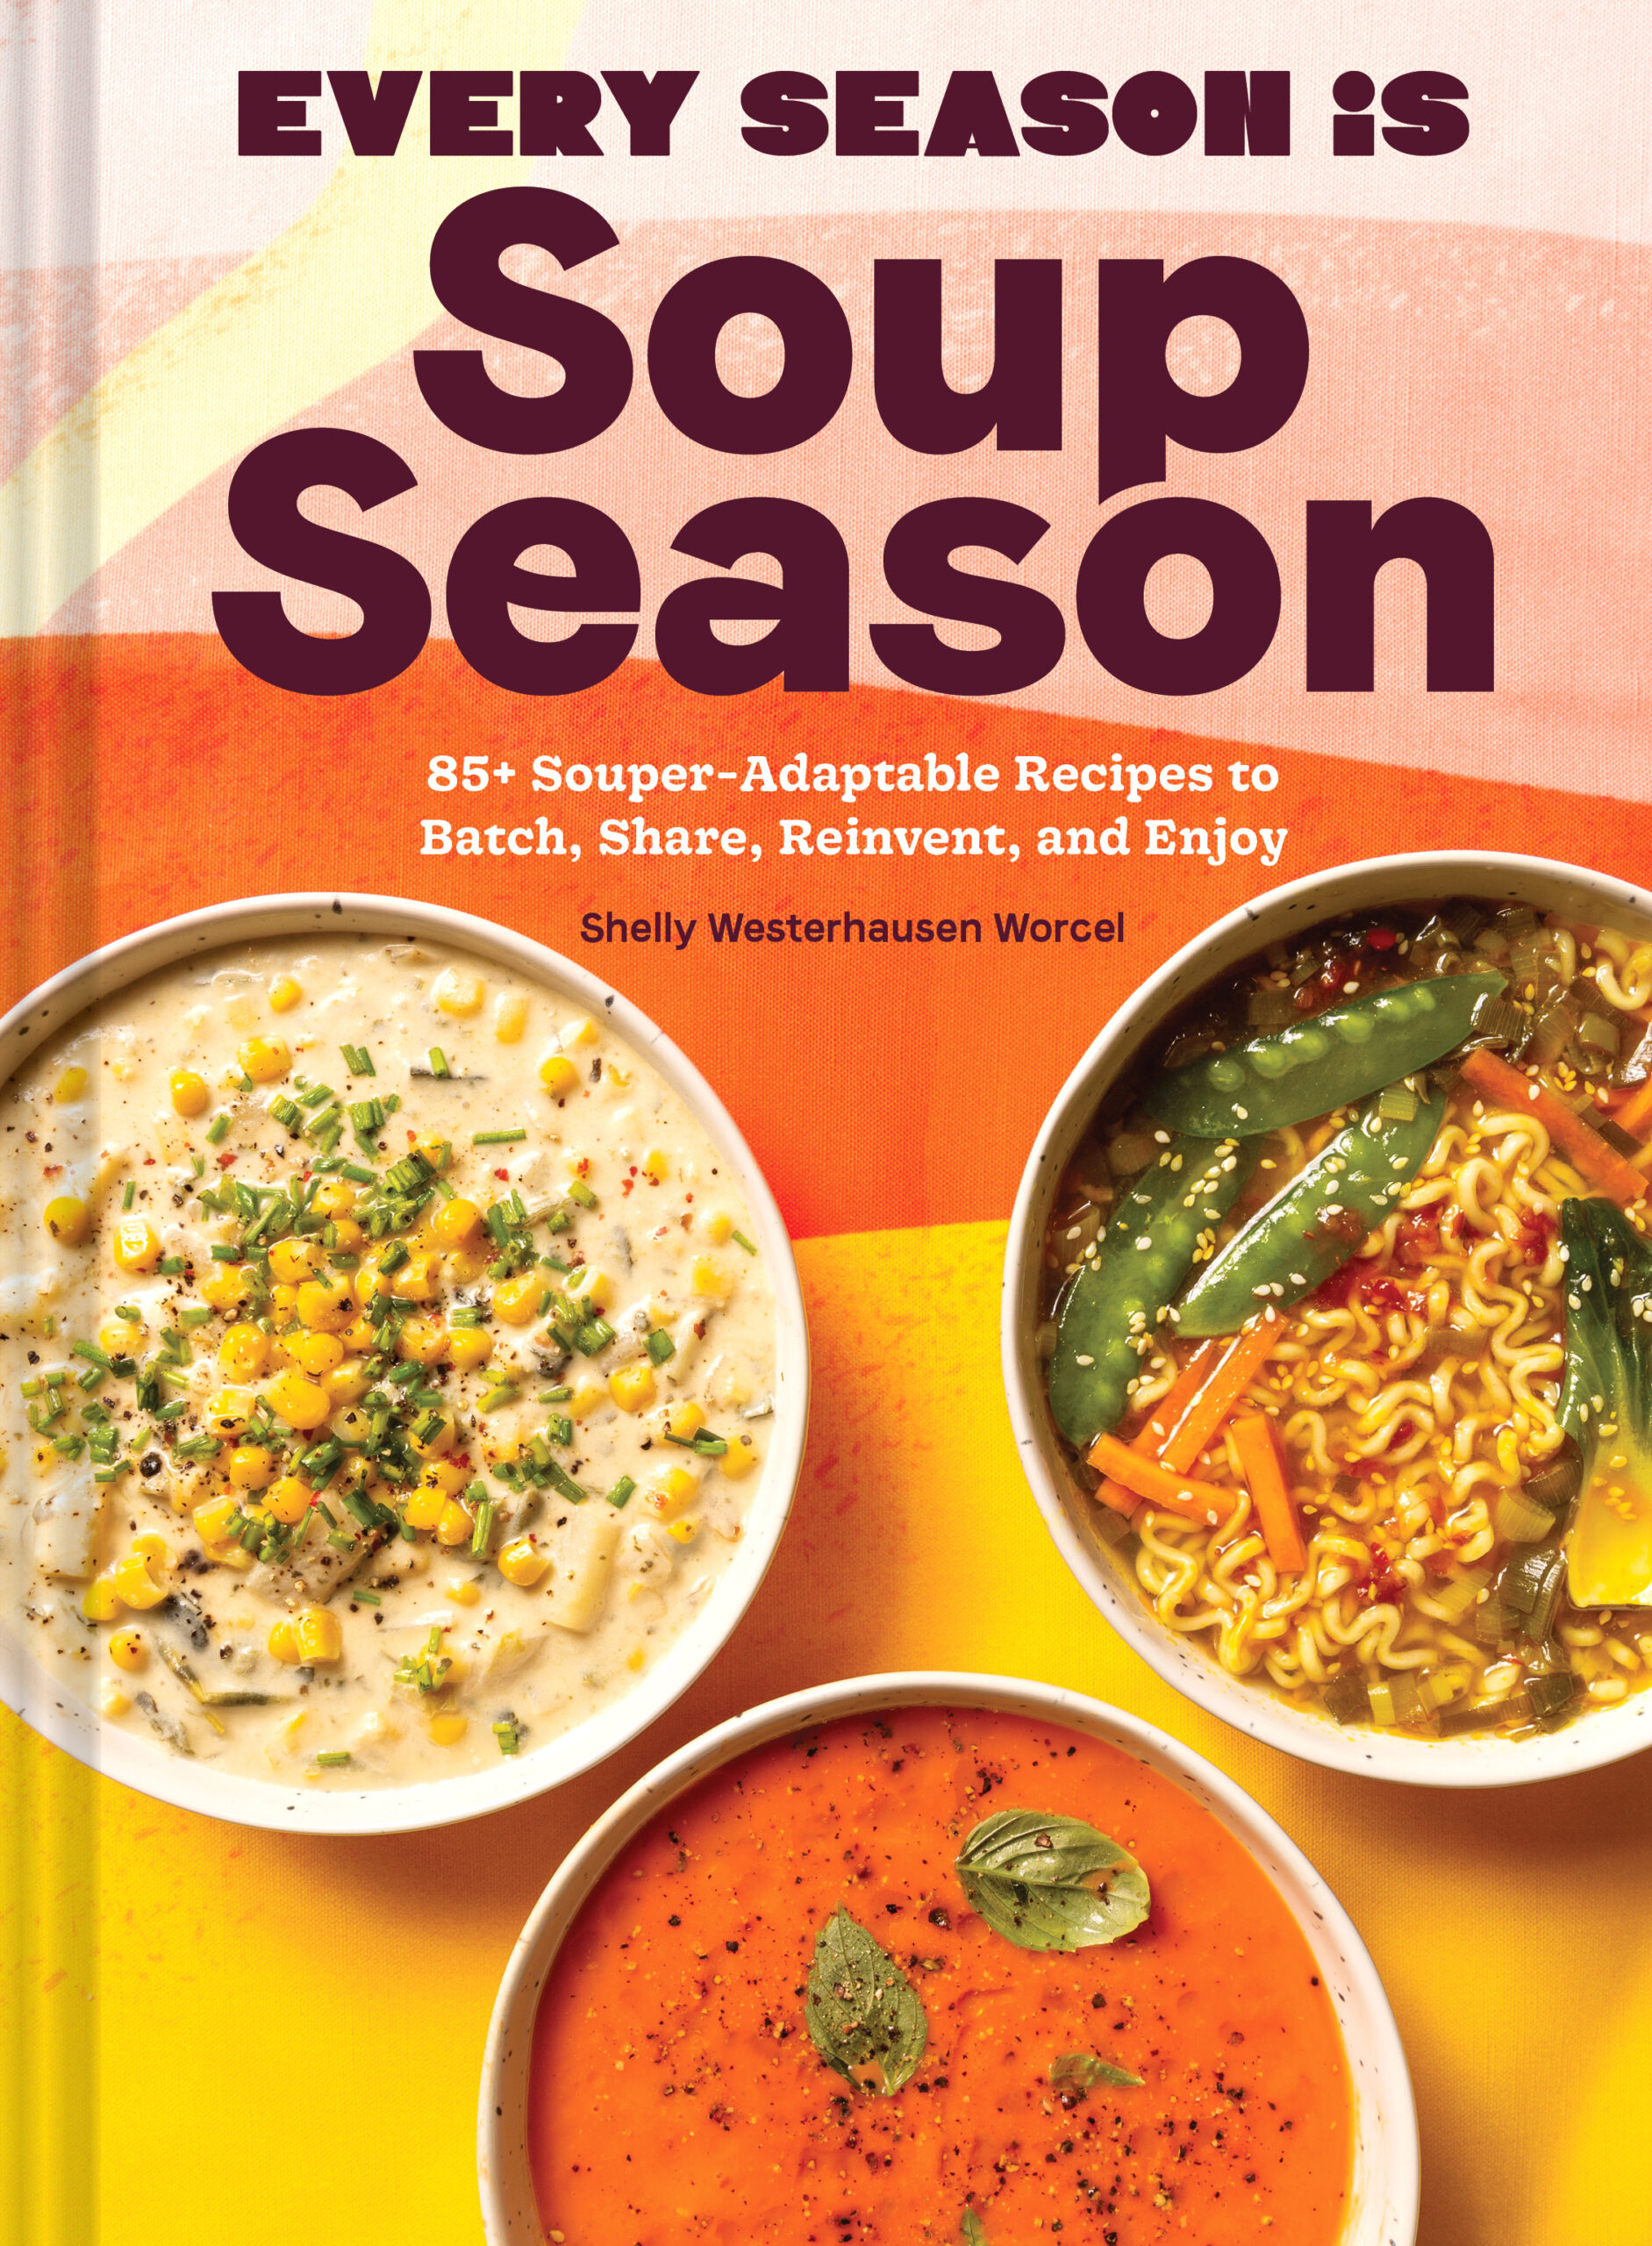 ANNOUNCING MY NEWEST COOKBOOK: EVERY SEASON IS SOUP SEASON!